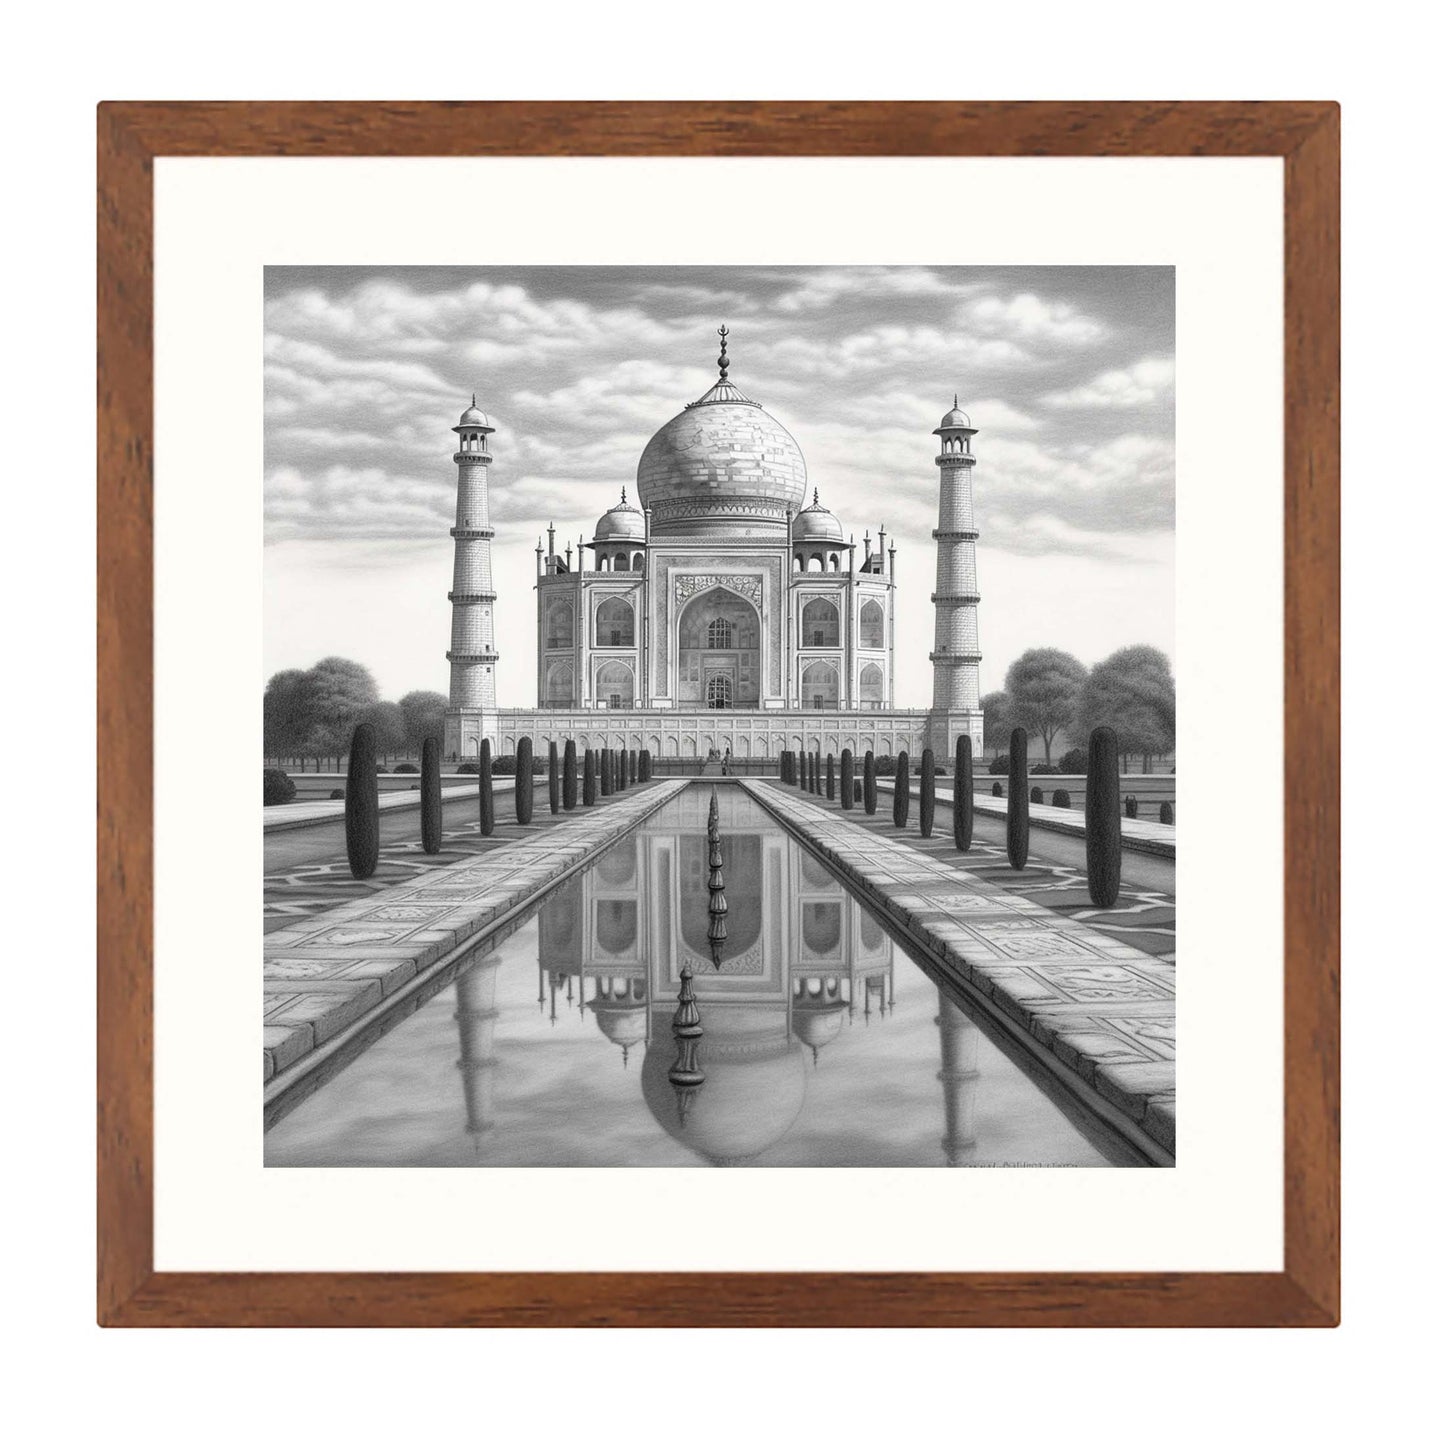 Taj Mahal - mural in the style of a drawing